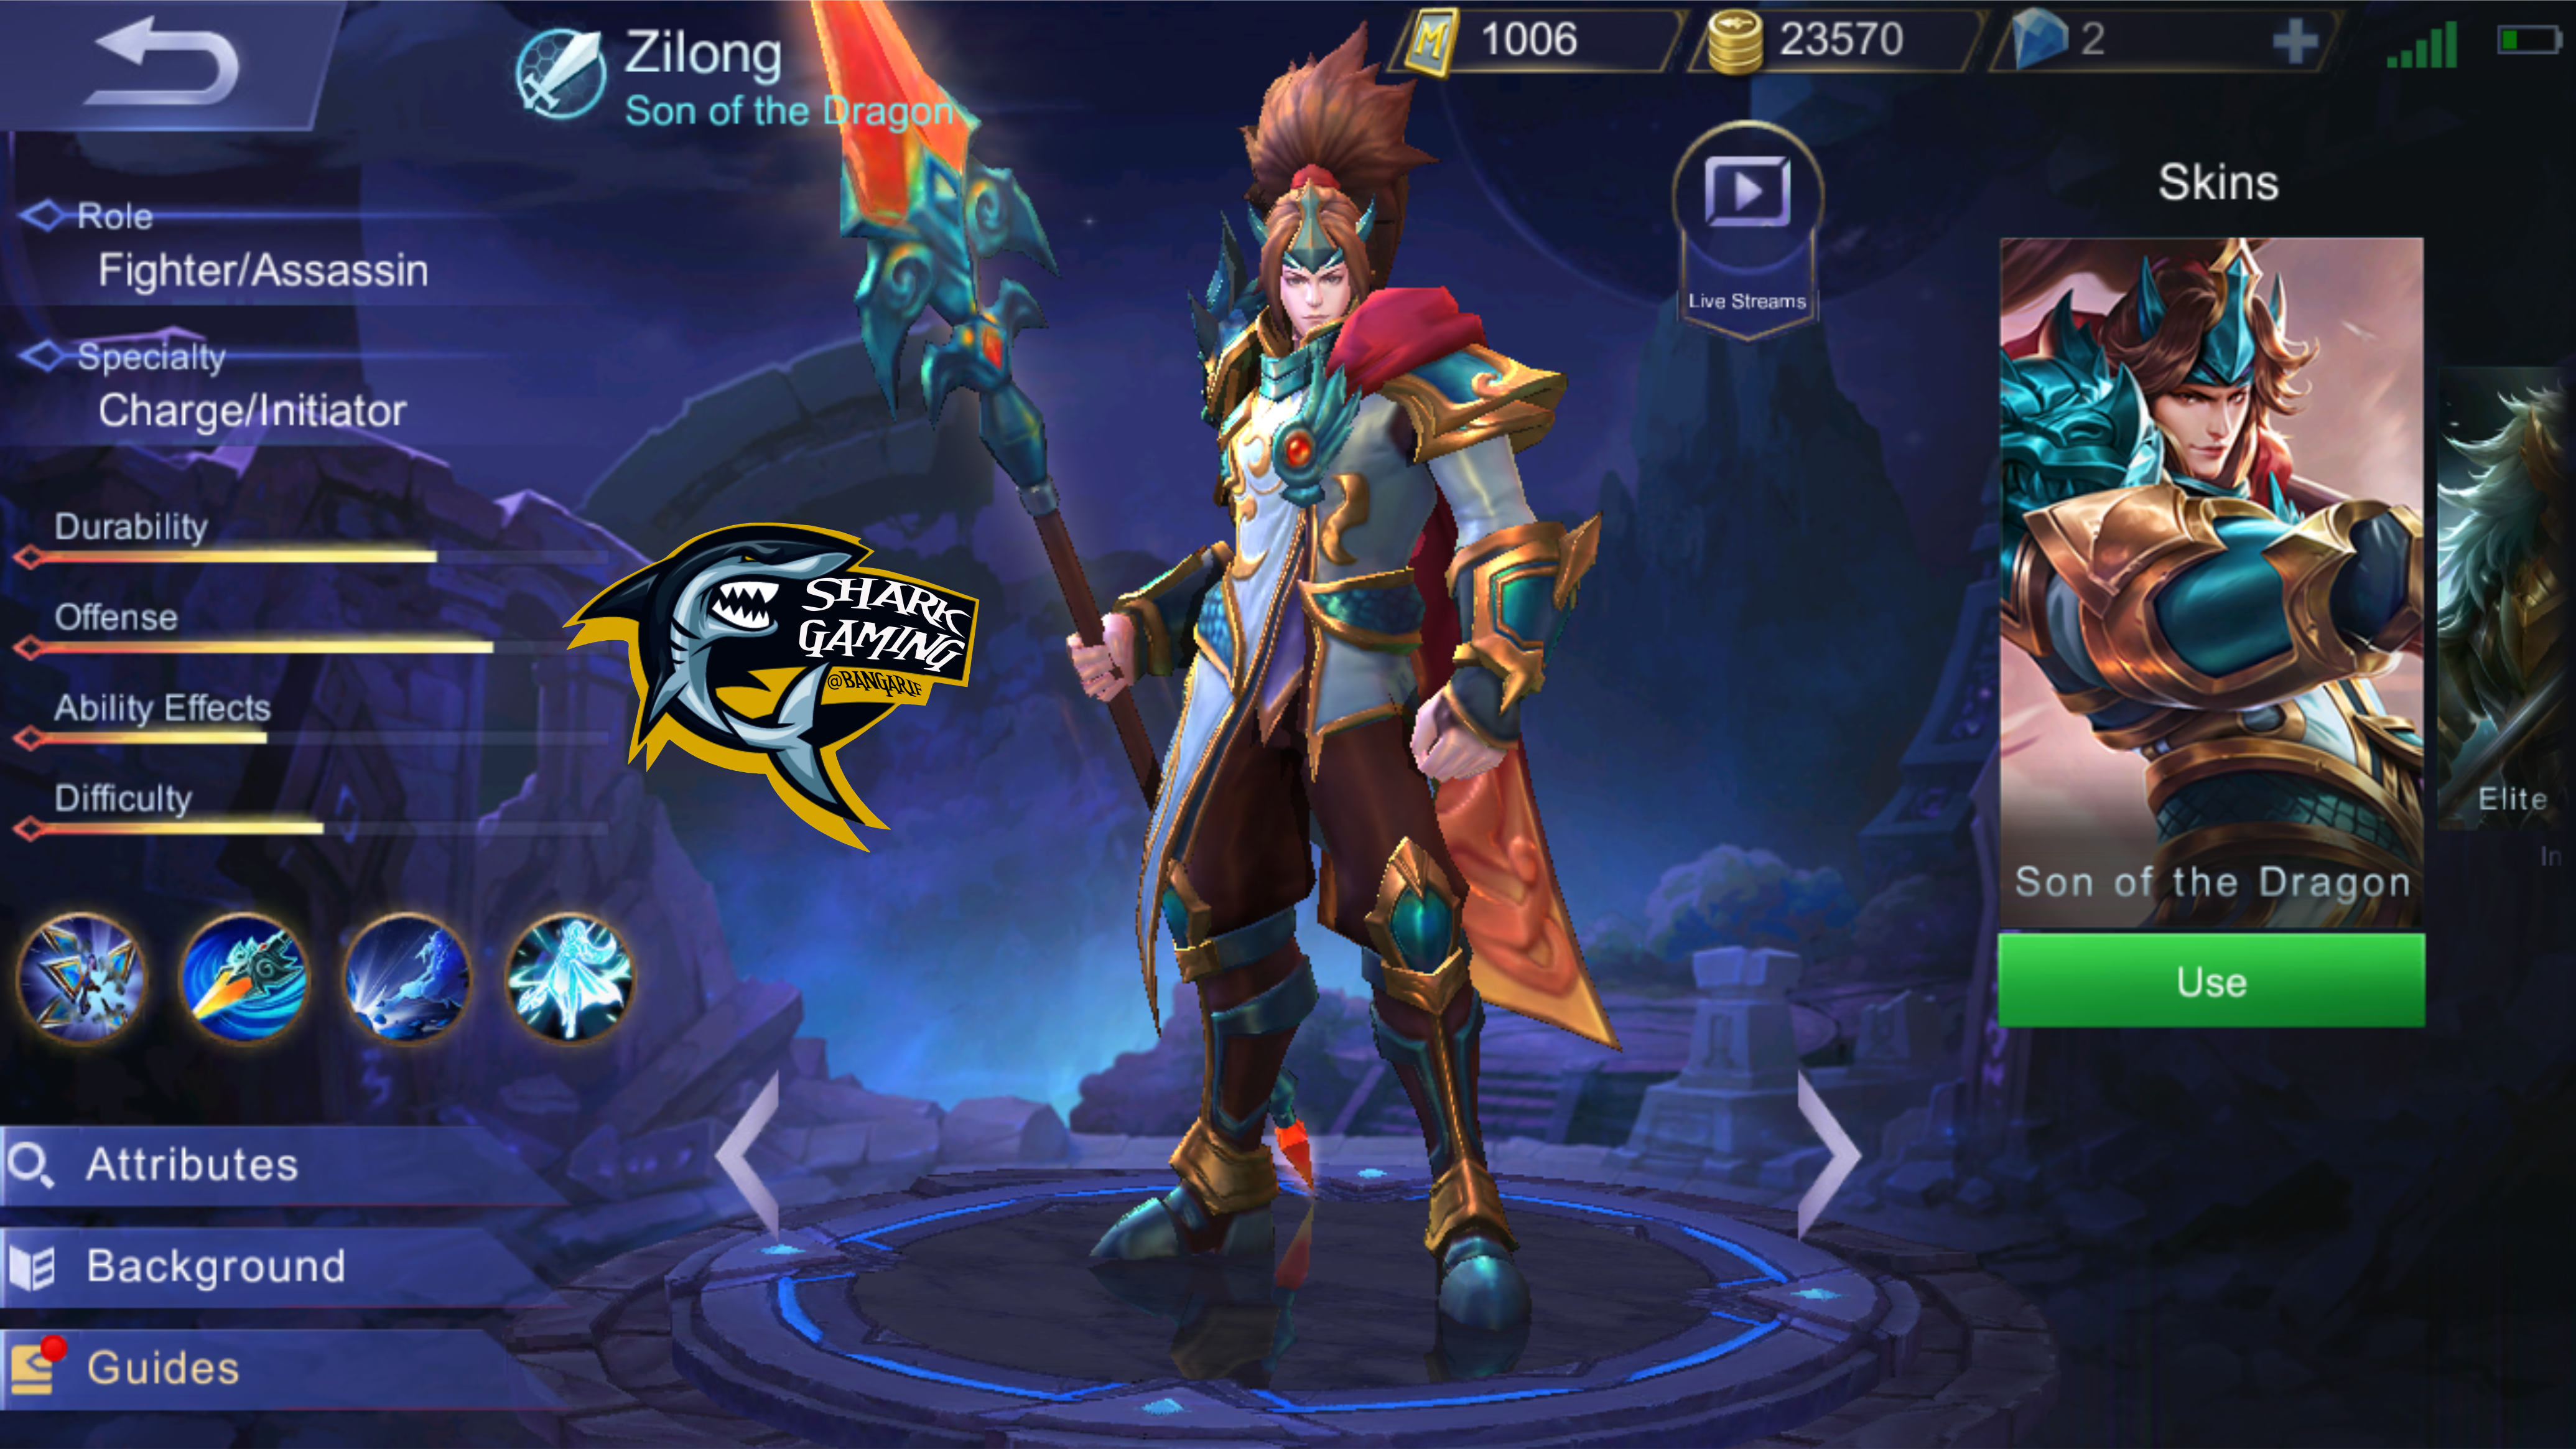 [GAME REVIEW] Hero Review Edition - Zilong: The Son of The Dragon